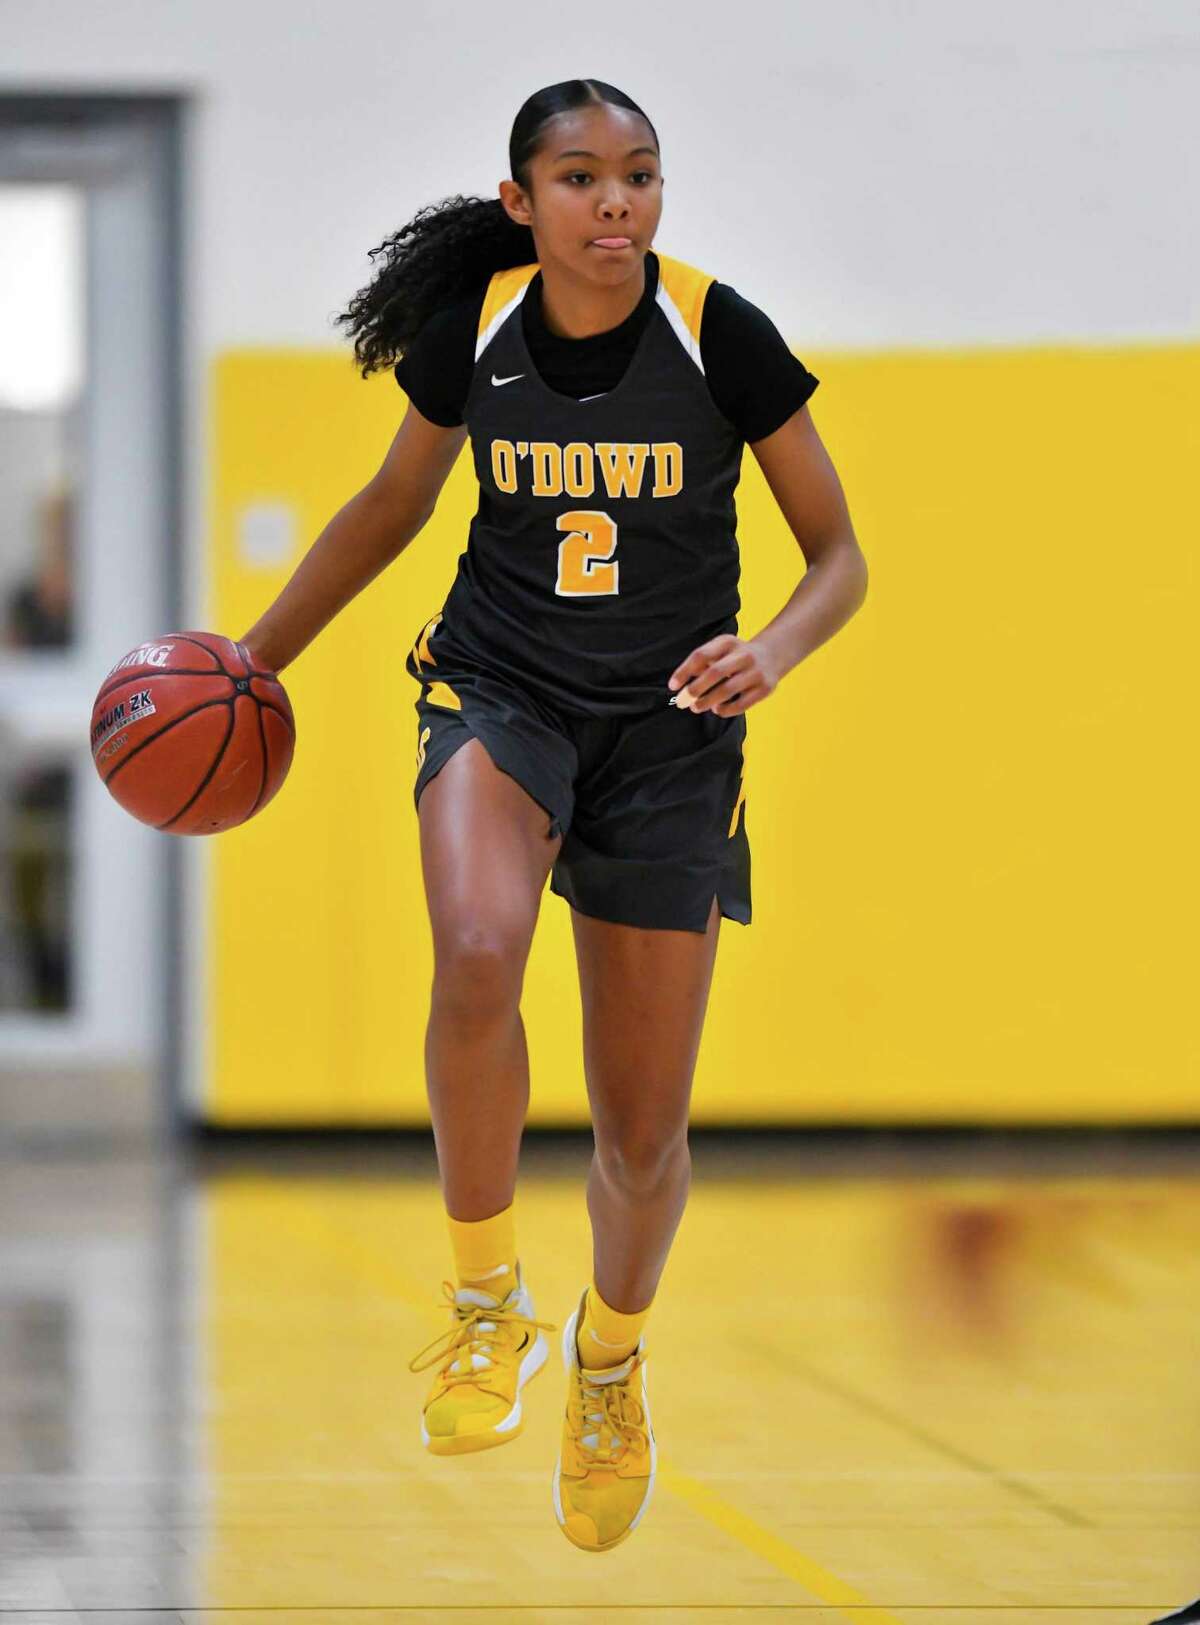 Bishop O'Dowd senior guard Amaya Bonner, who has signed to Cal, leads the team with a 23-point, 10.8 rebounds and 4.8 steals averages per game for the 6-0 Dragons.